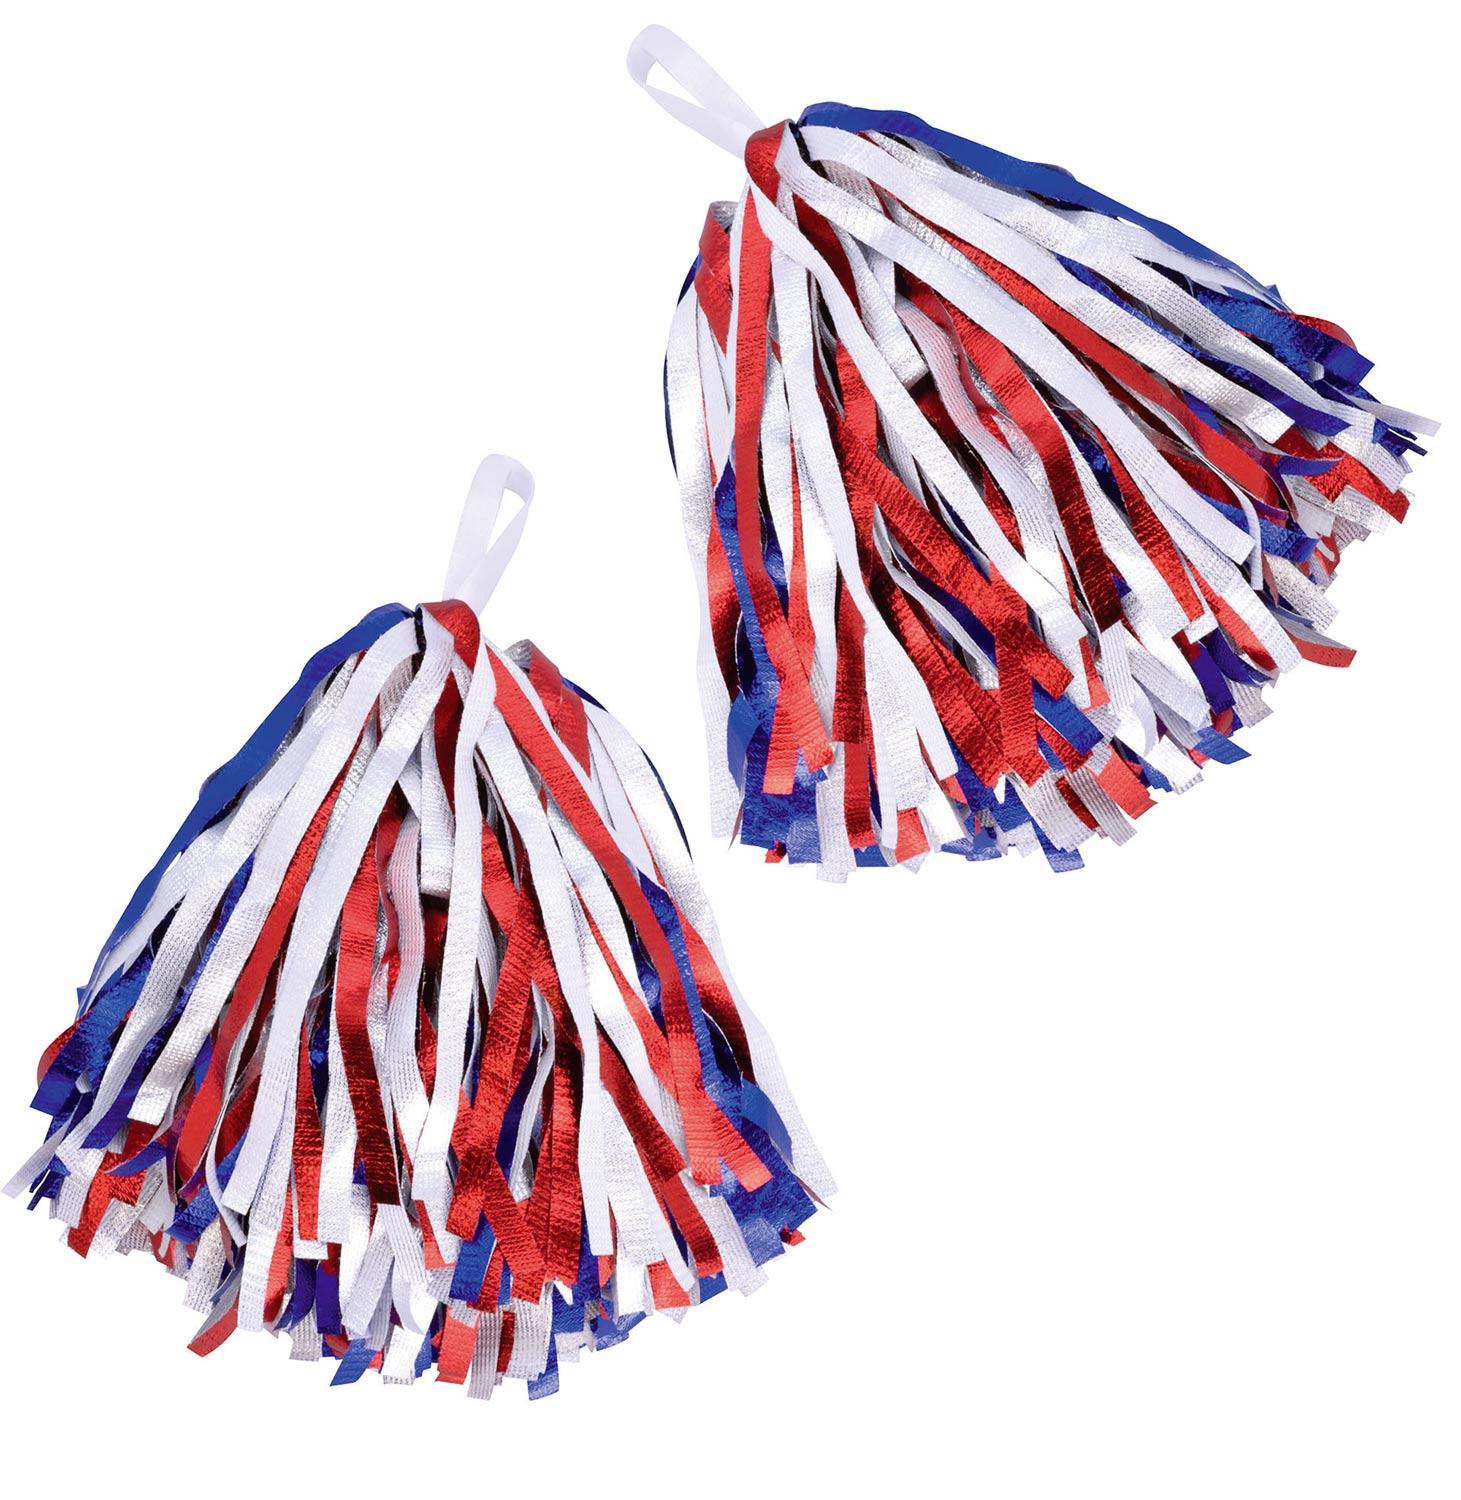 A pair of Patriotic Red White and Blue Cheerleader Pom Pom Shakers by B Novs BA1323 available here at Karnival Costmes online party shop